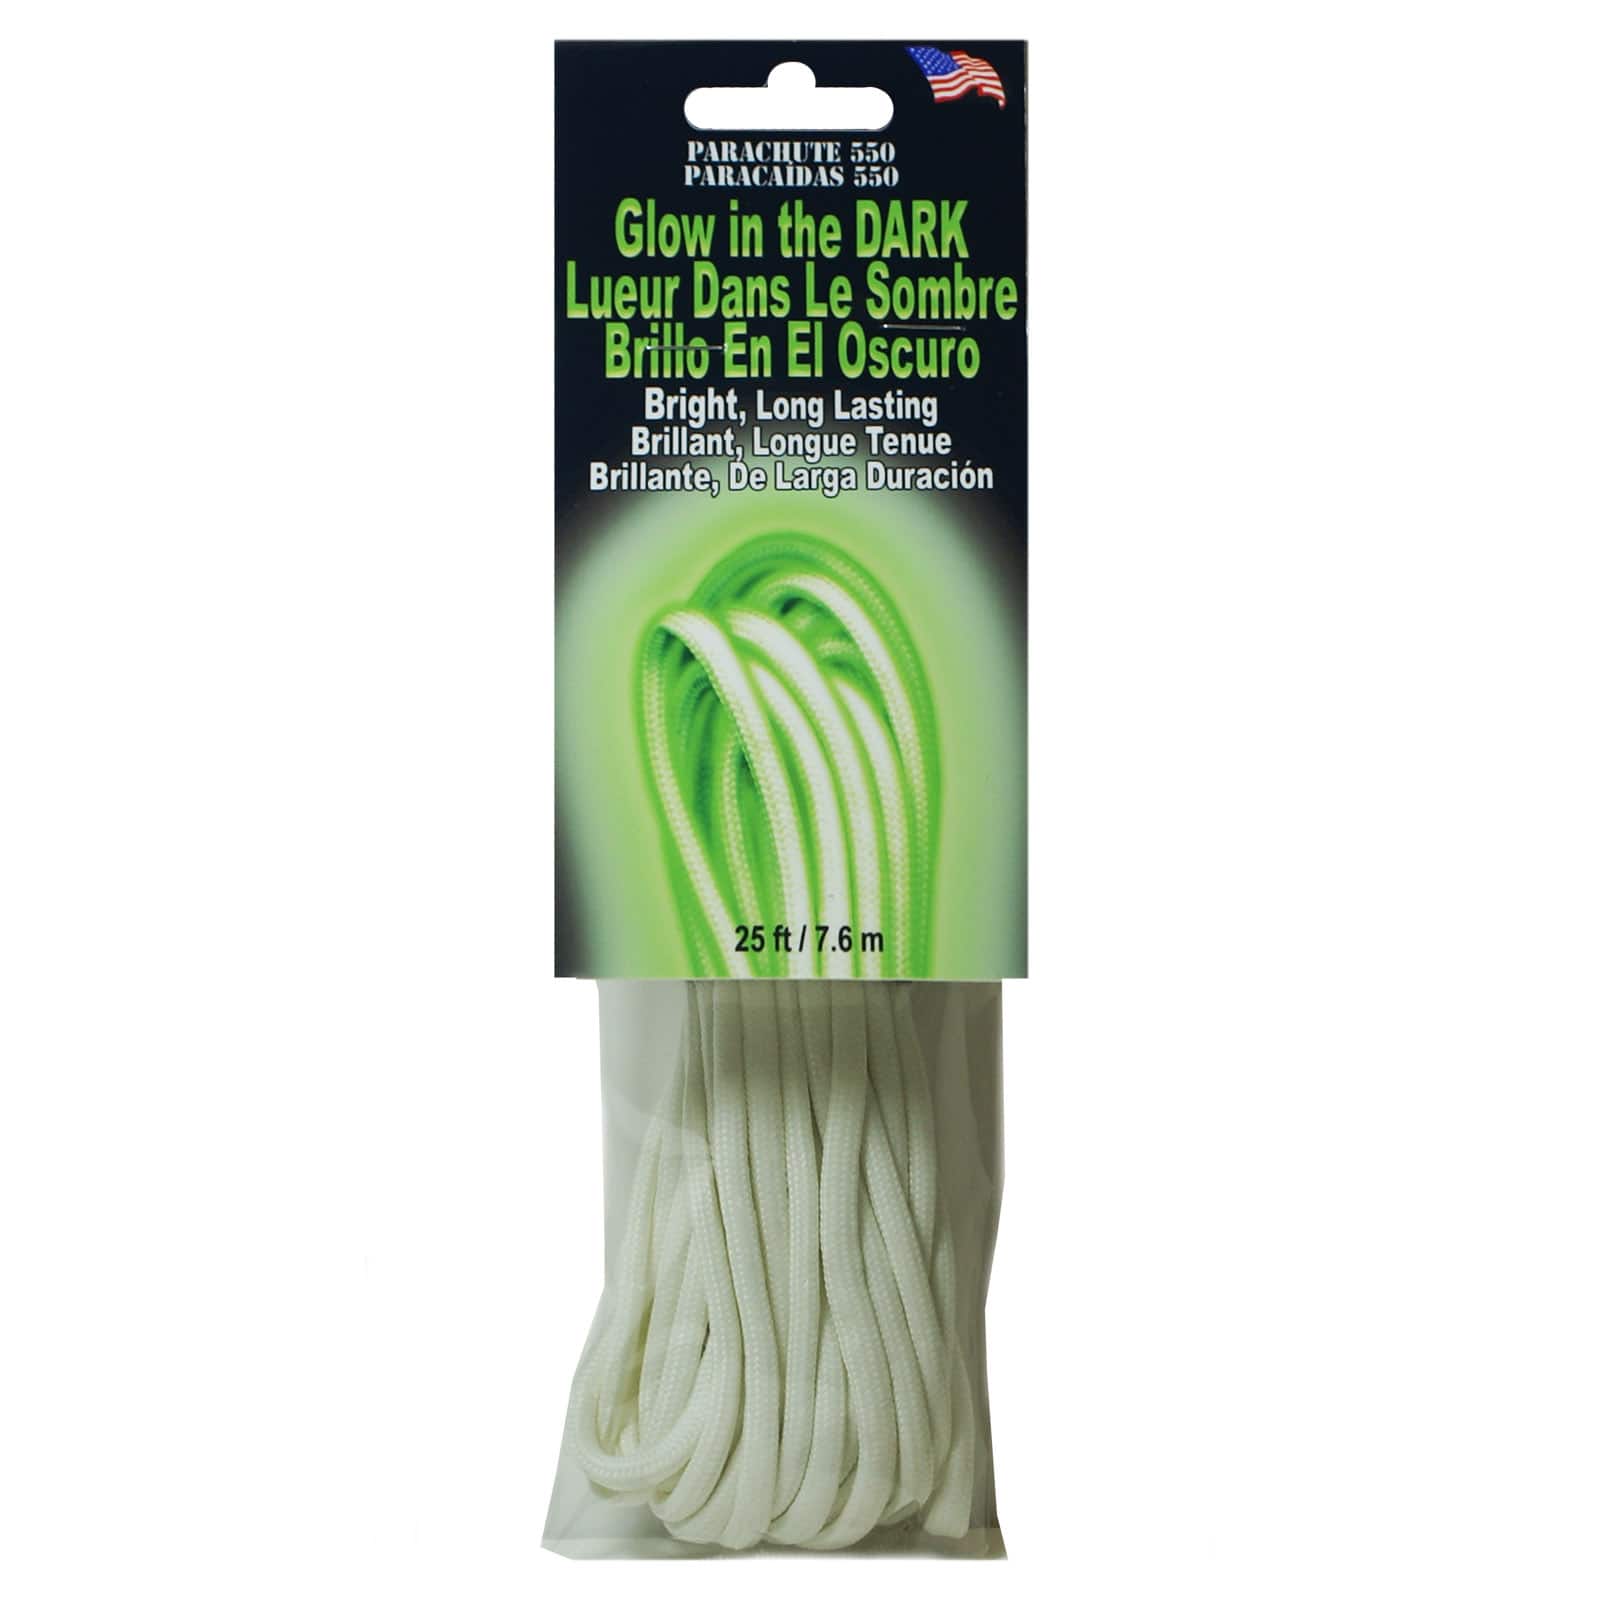 Buy the Pepperell 550 Parachute Cord, Glow In The Dark at Michaels